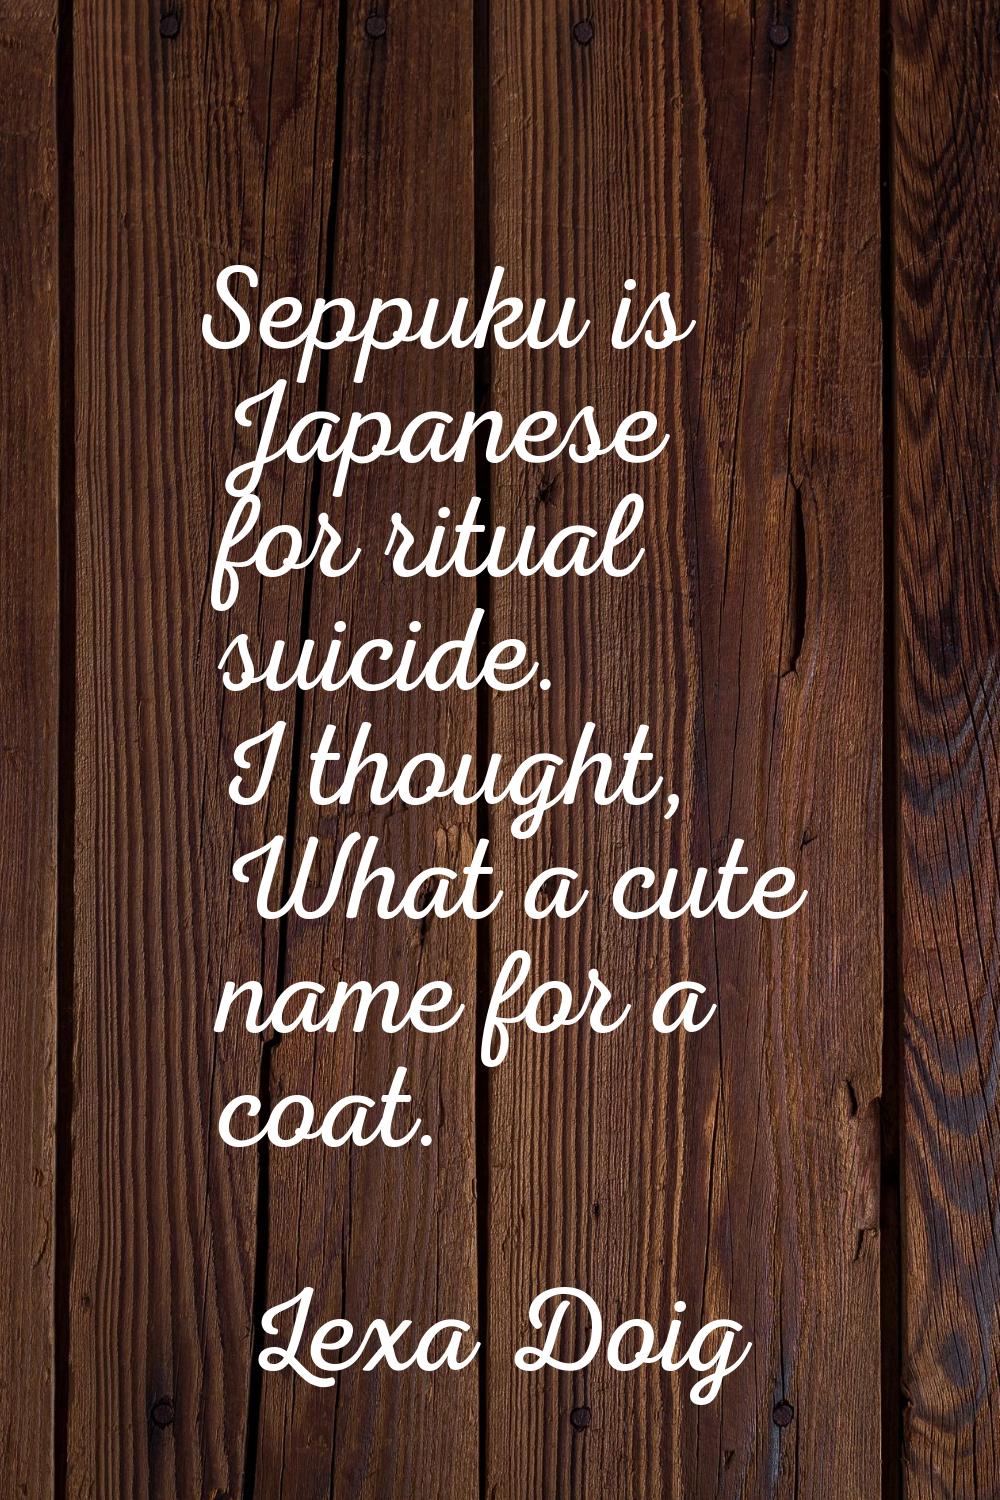 Seppuku is Japanese for ritual suicide. I thought, What a cute name for a coat.